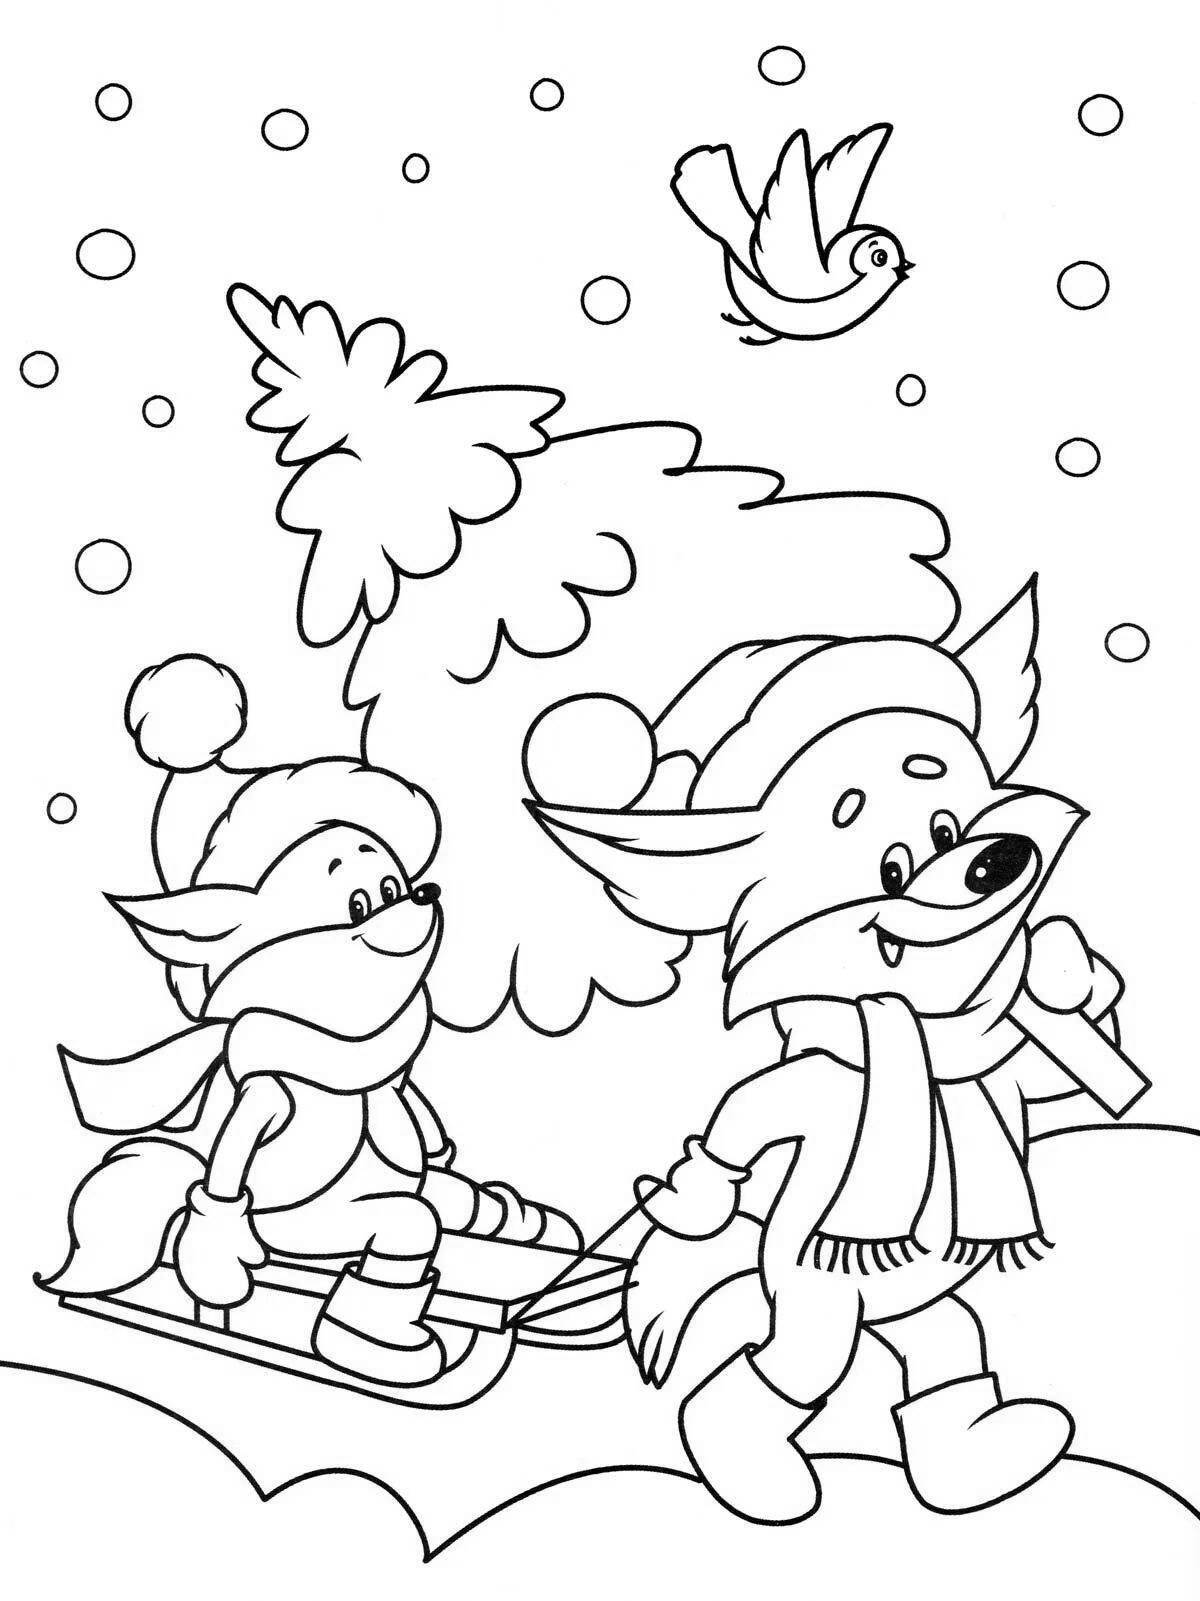 Colourful winter coloring book for children 2-3 years old